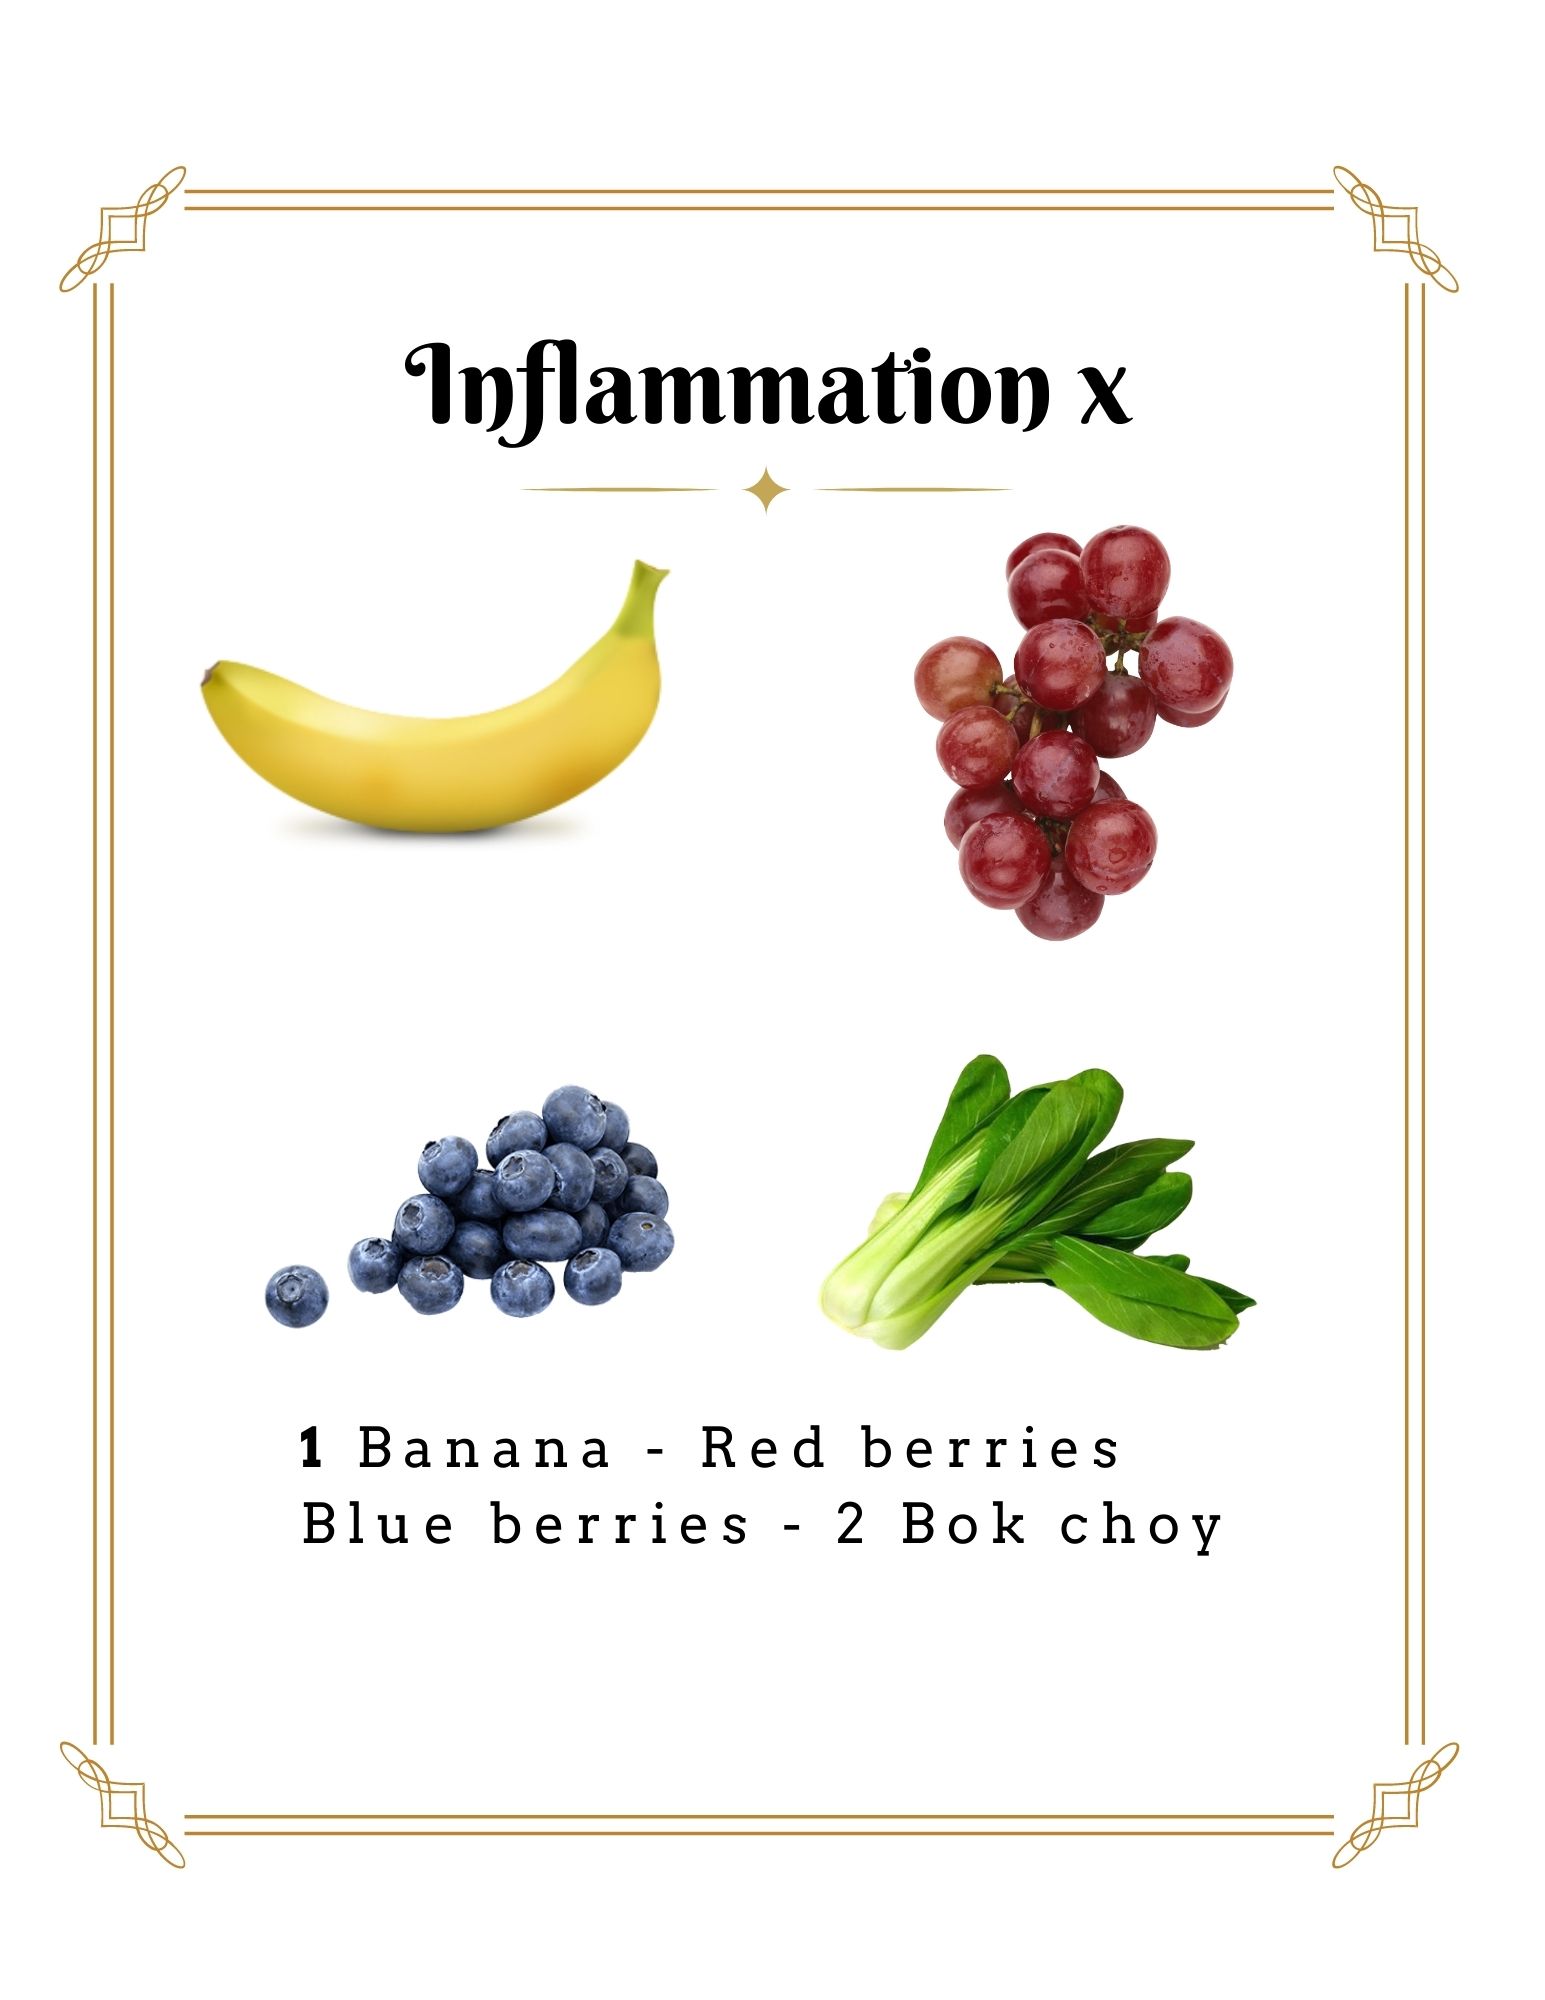 A smoothie for Inflammation